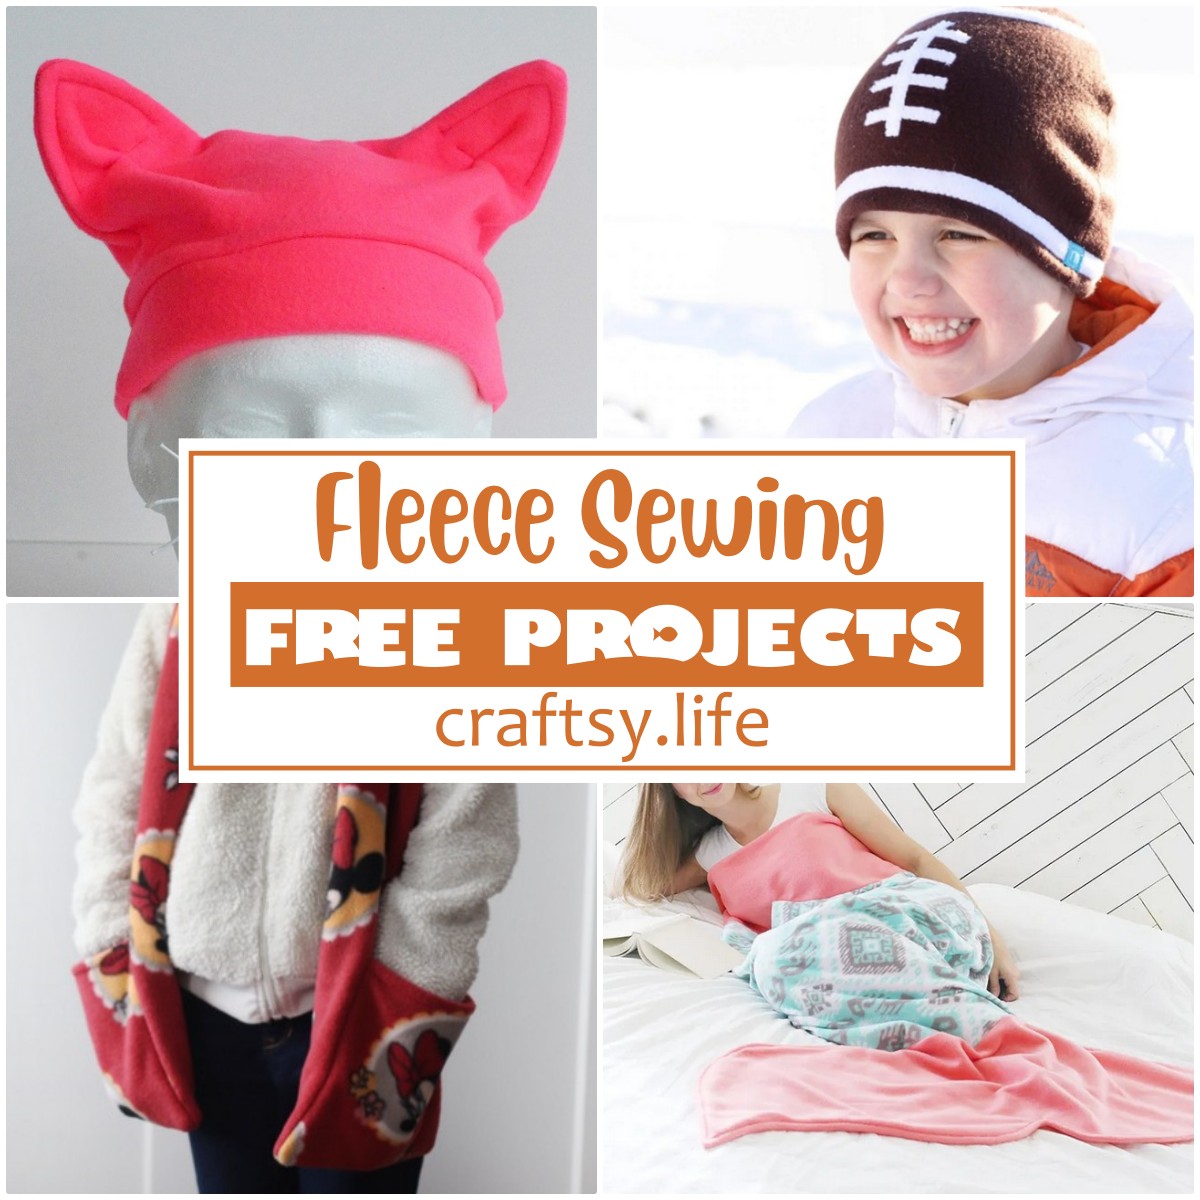 Free Fleece Sewing Projects